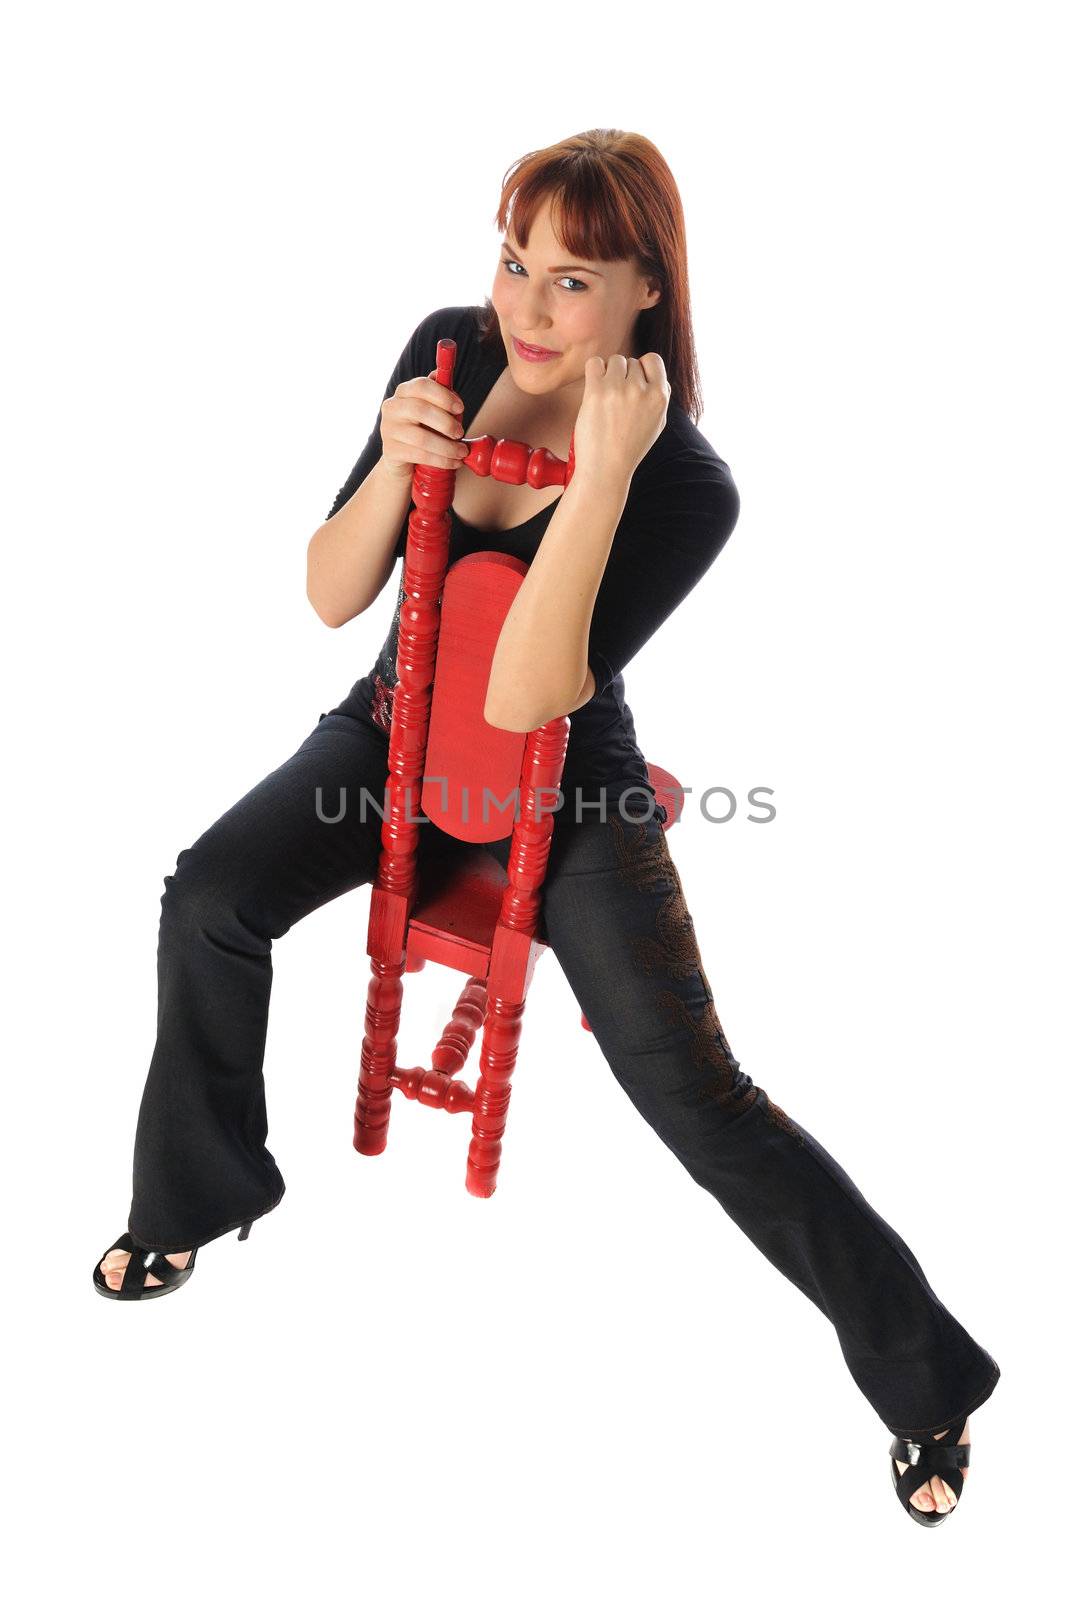 attractive woman with a red chair by PDImages